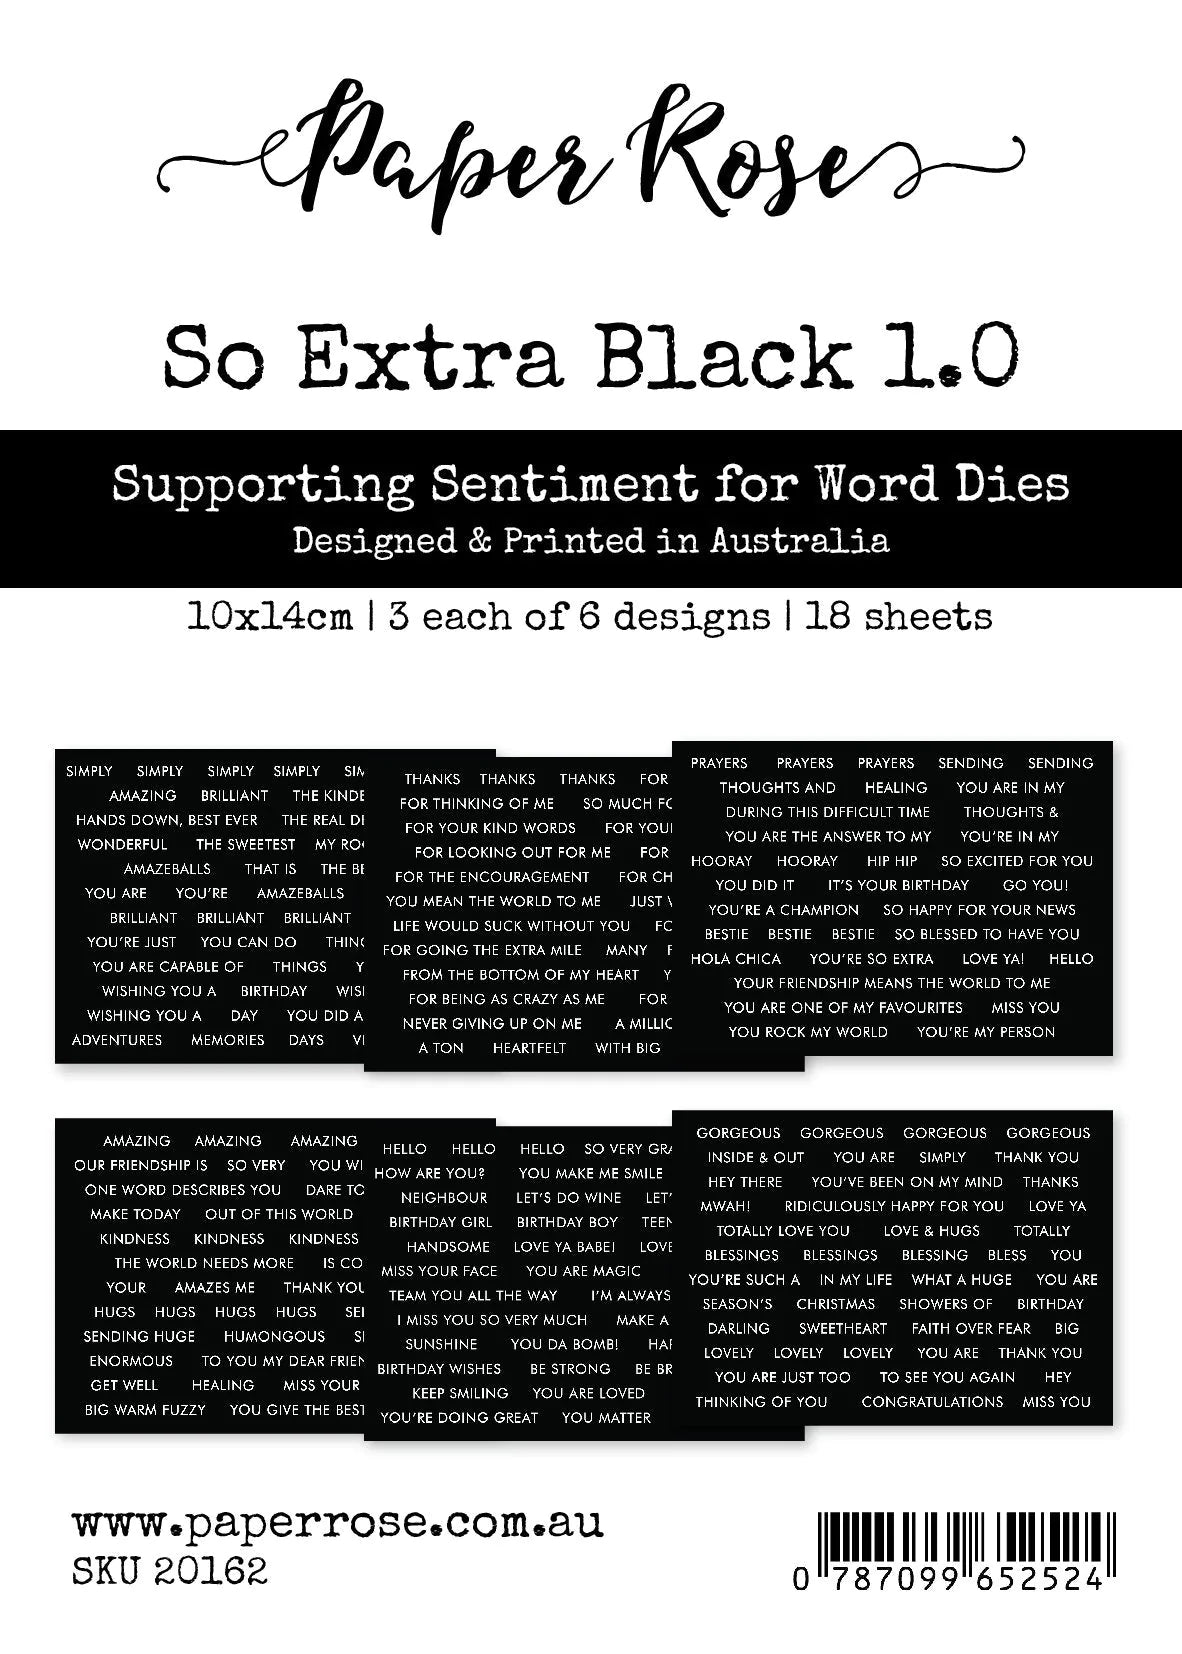 Paper Rose - So Extra Black 1.0 Supporting Sentiments